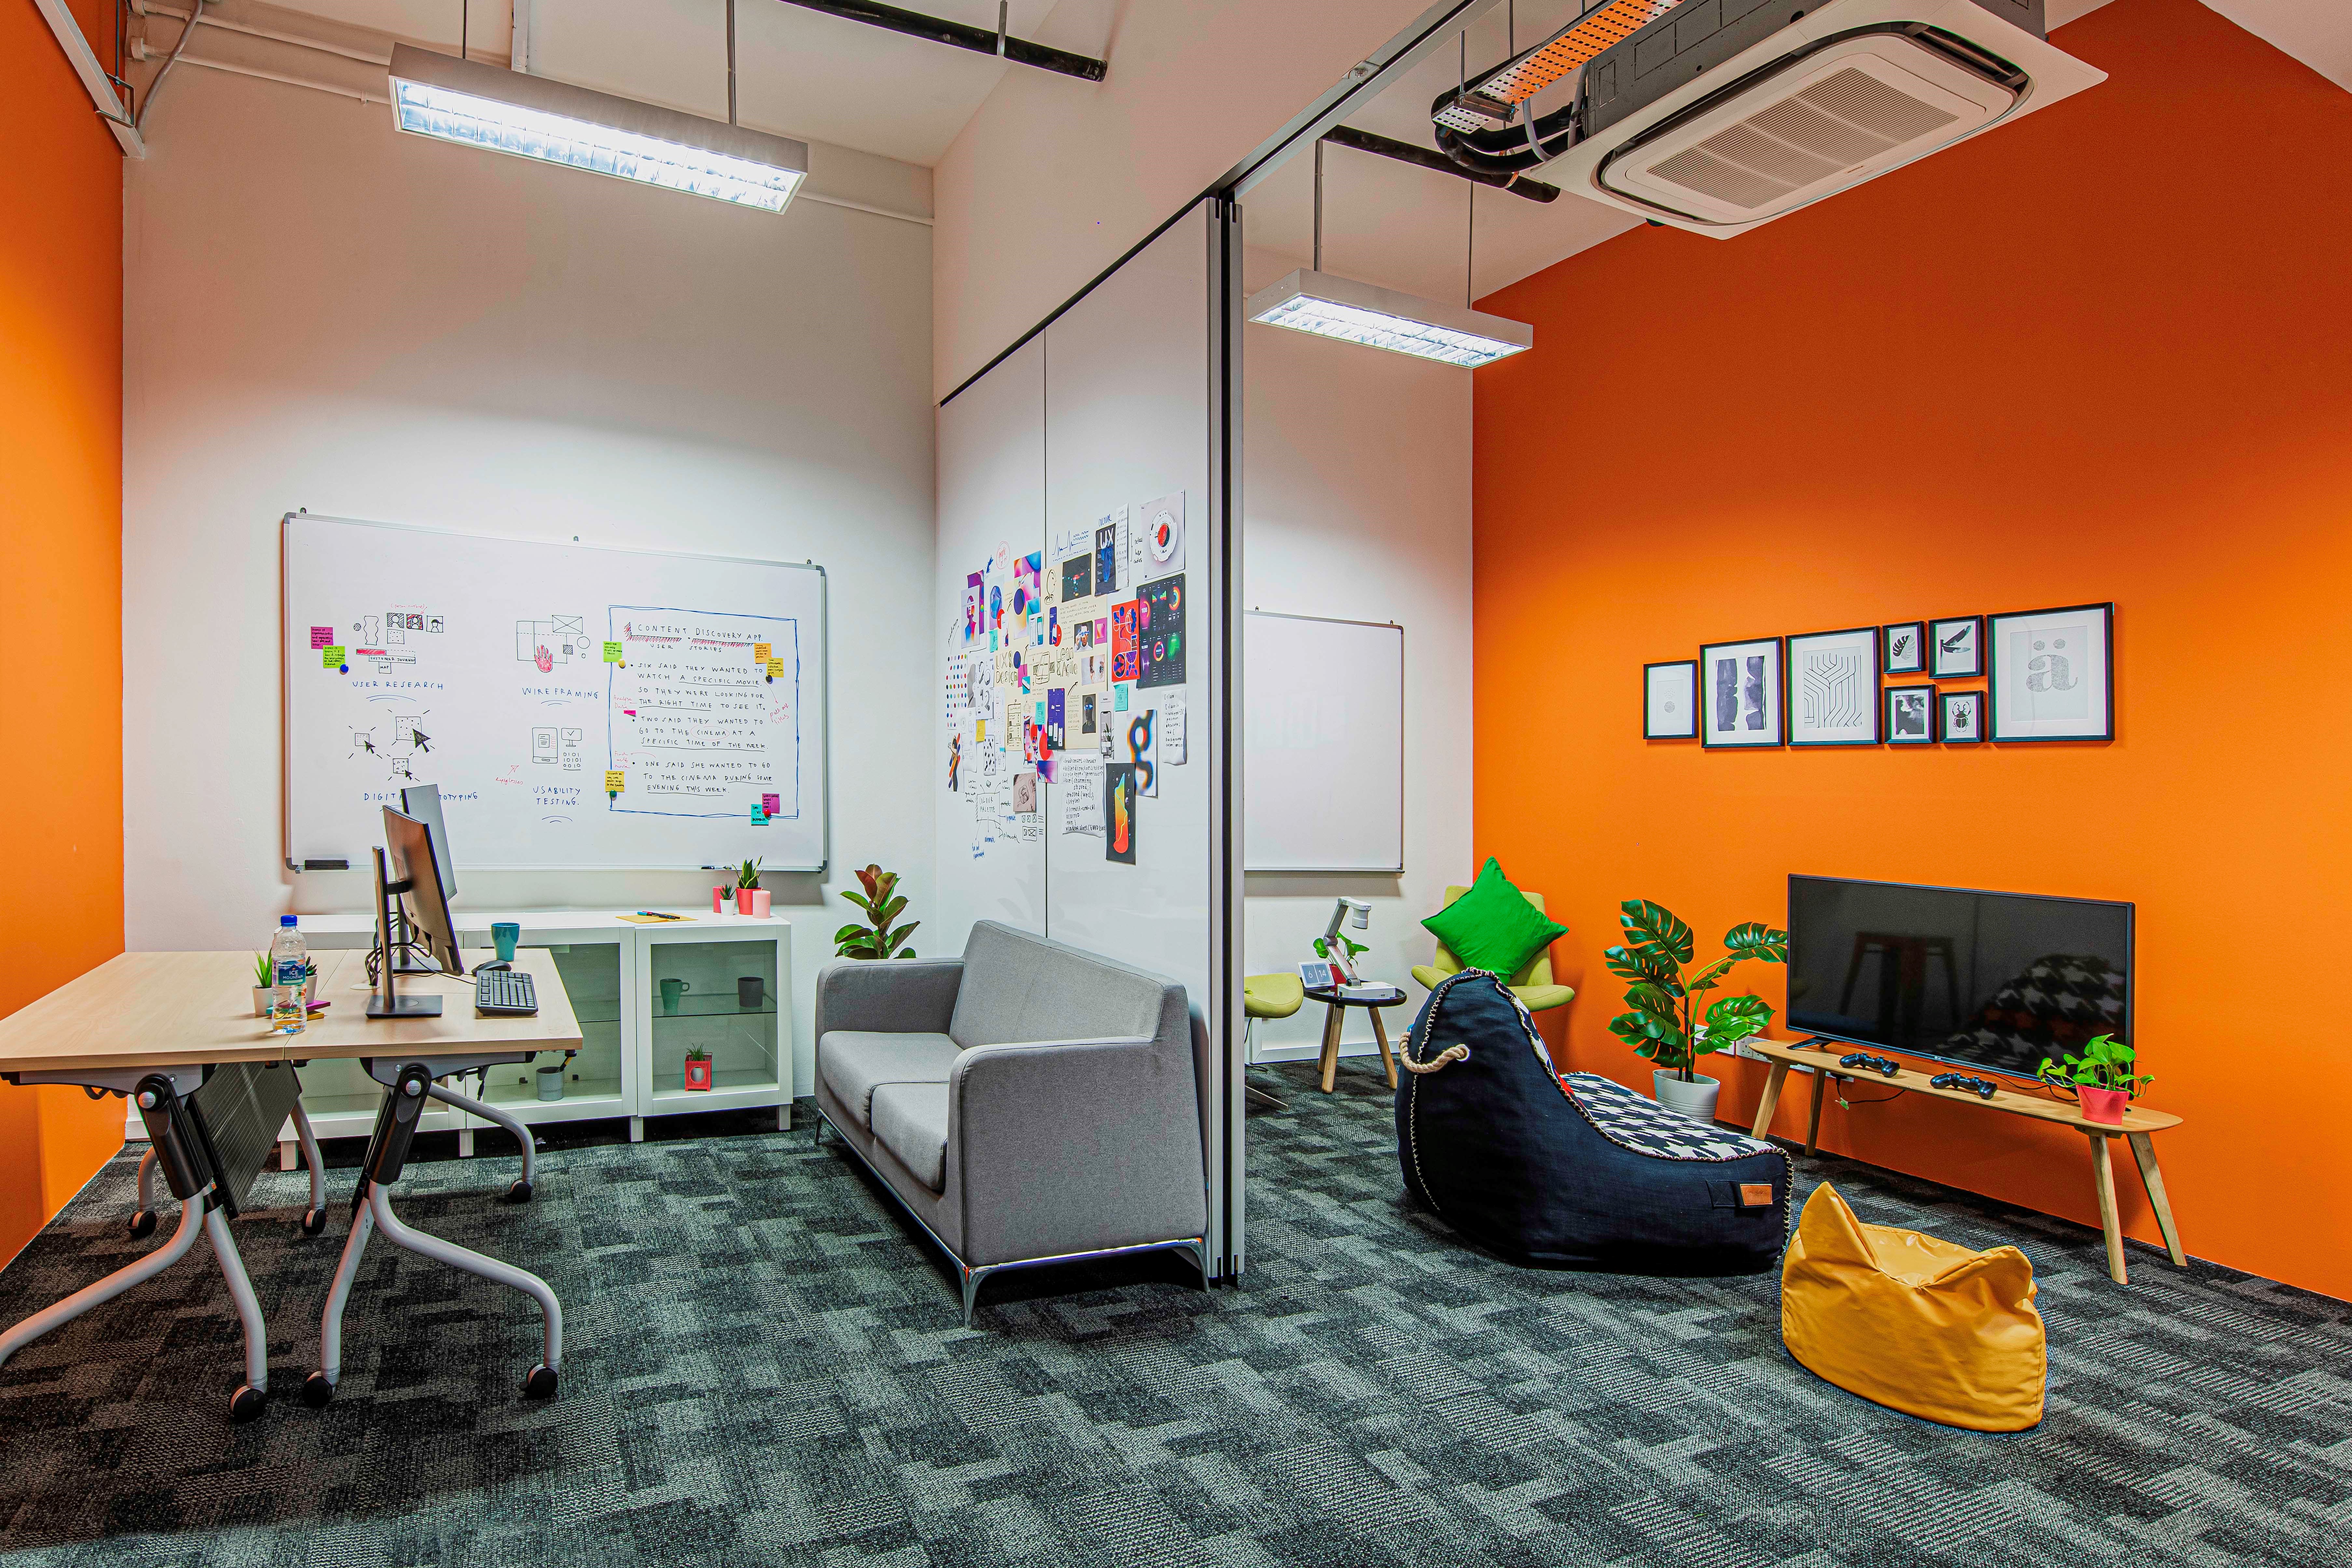 A room divider separates a space featuring whiteboards, a desk, and chairs in IMDA's PIXEL UI/UX lab